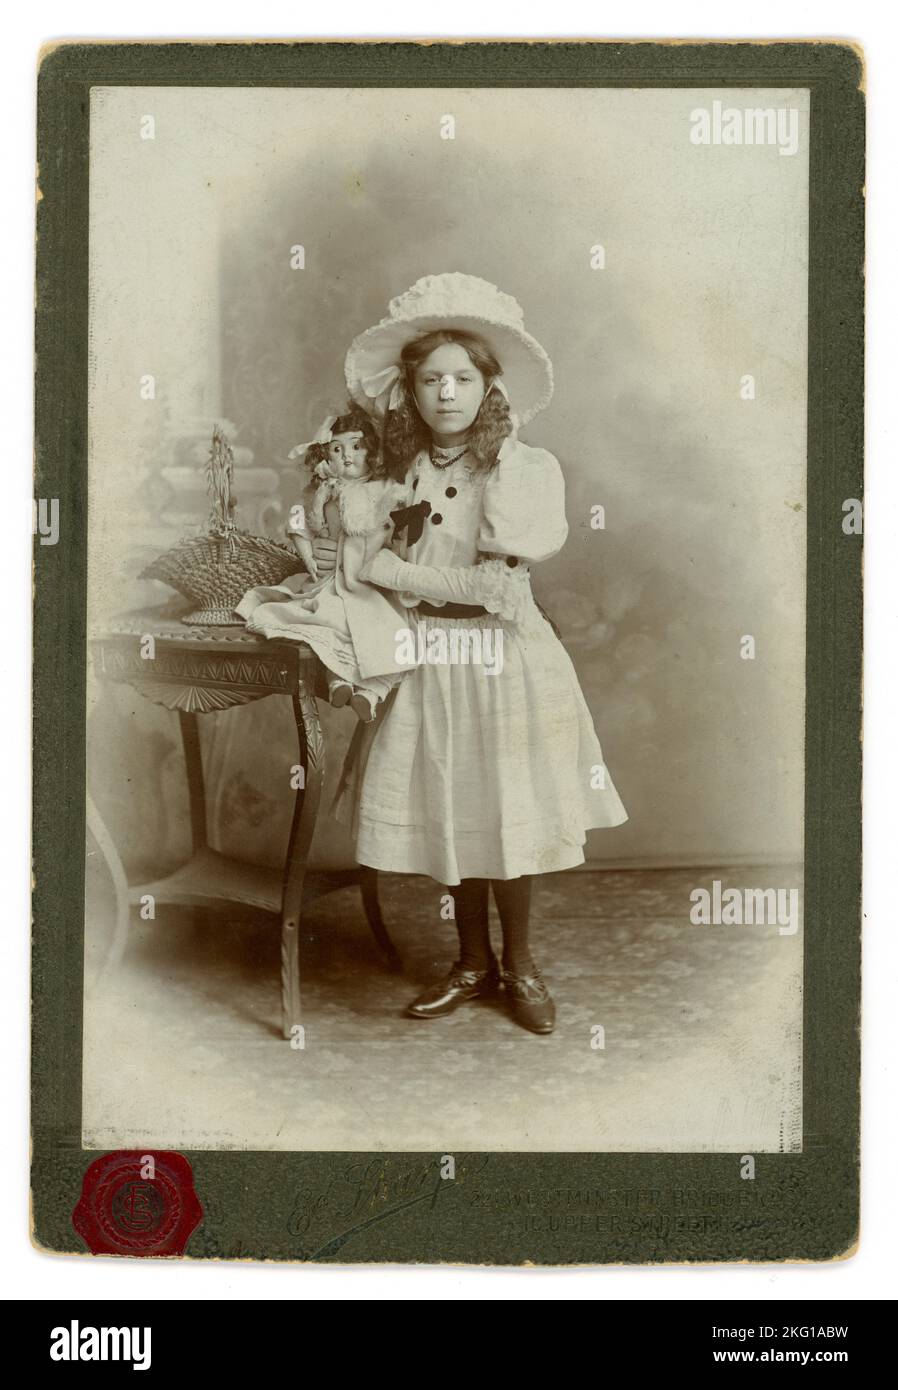 Edwardian era cabinet card studio portrait of spoilt-looking privileged wealthy middle or upper class Edwardian girl holding a doll which has a china face, perhaps a new birthday present or a treasured possession or could be a studio prop. On reverse is written Clara R. J. Whant, aged 11 1909. The girl wears expensive clothing - a large wide brimmed hat as was the fashion in this period, and white frock with puffed sleeves. She has crimped long hair tied in bows.  From the studio of Edward Sharp at Islington and Westminster Bridge London . U.K. Dated 1909. Stock Photo